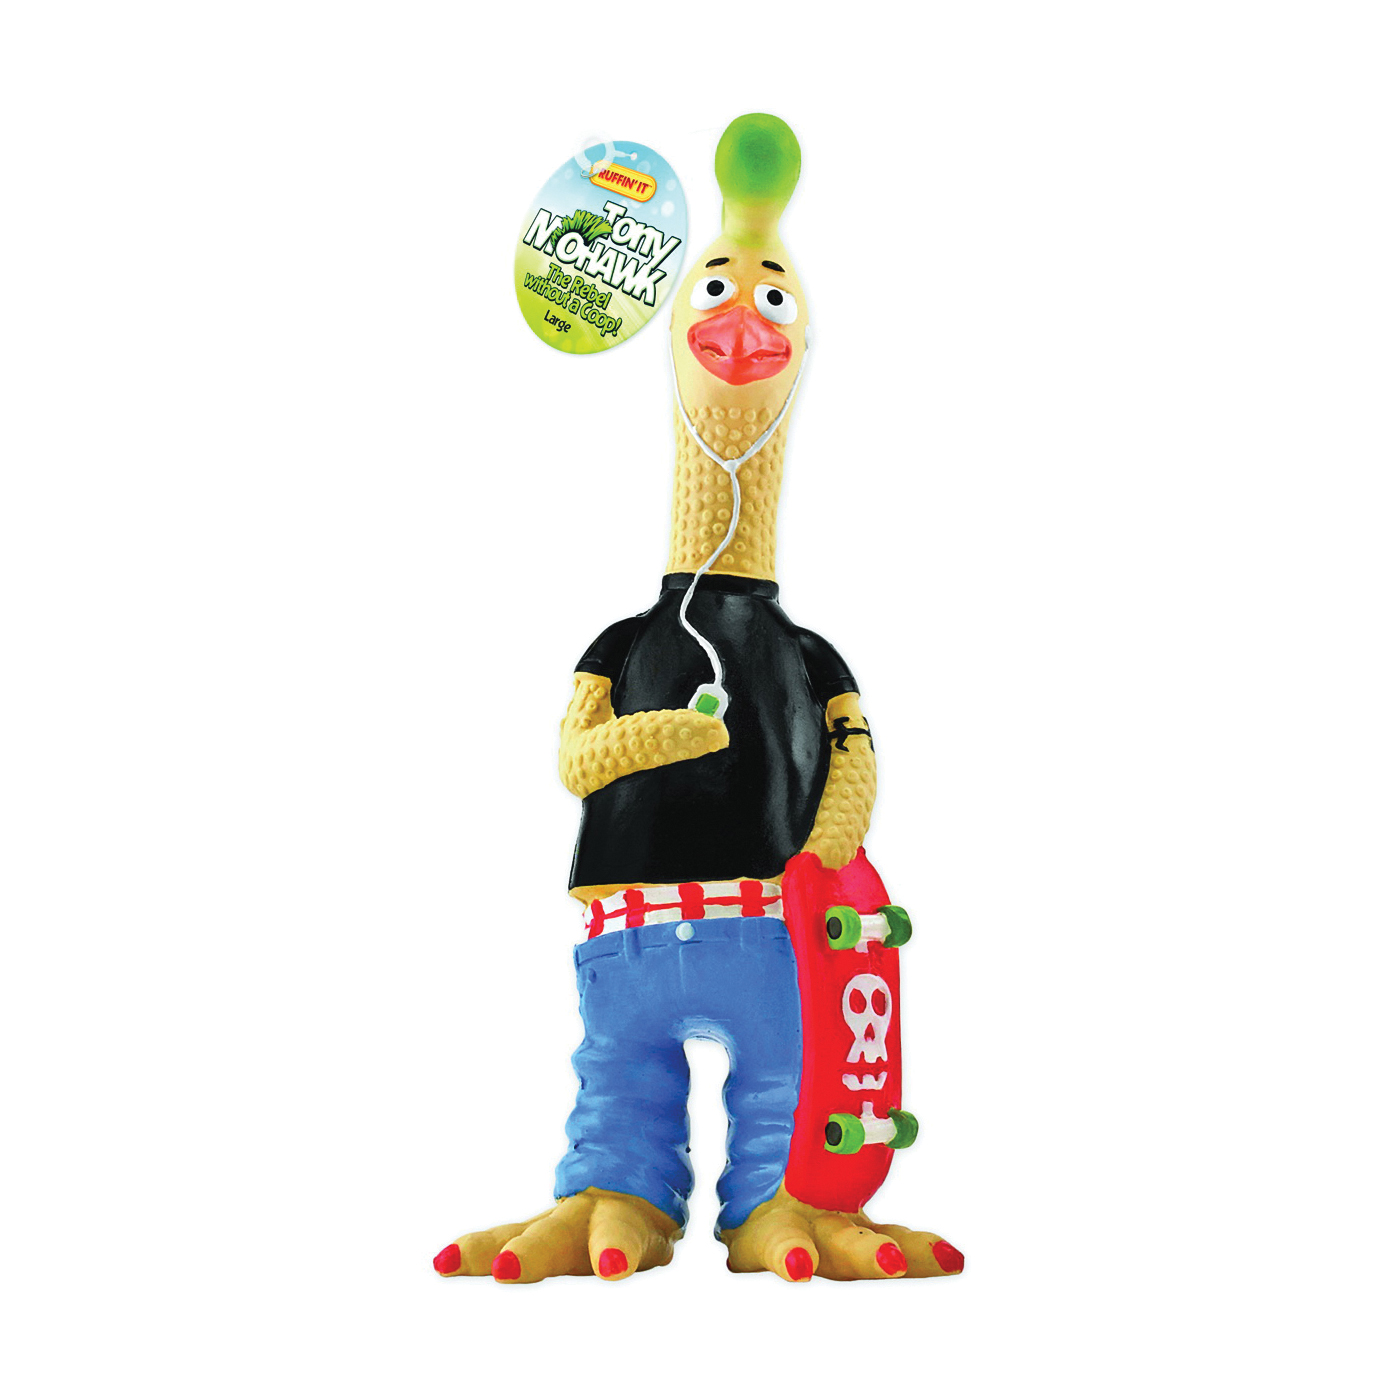 80536 Dog Toy, L, Tony Mohawk Chicken, Rubber